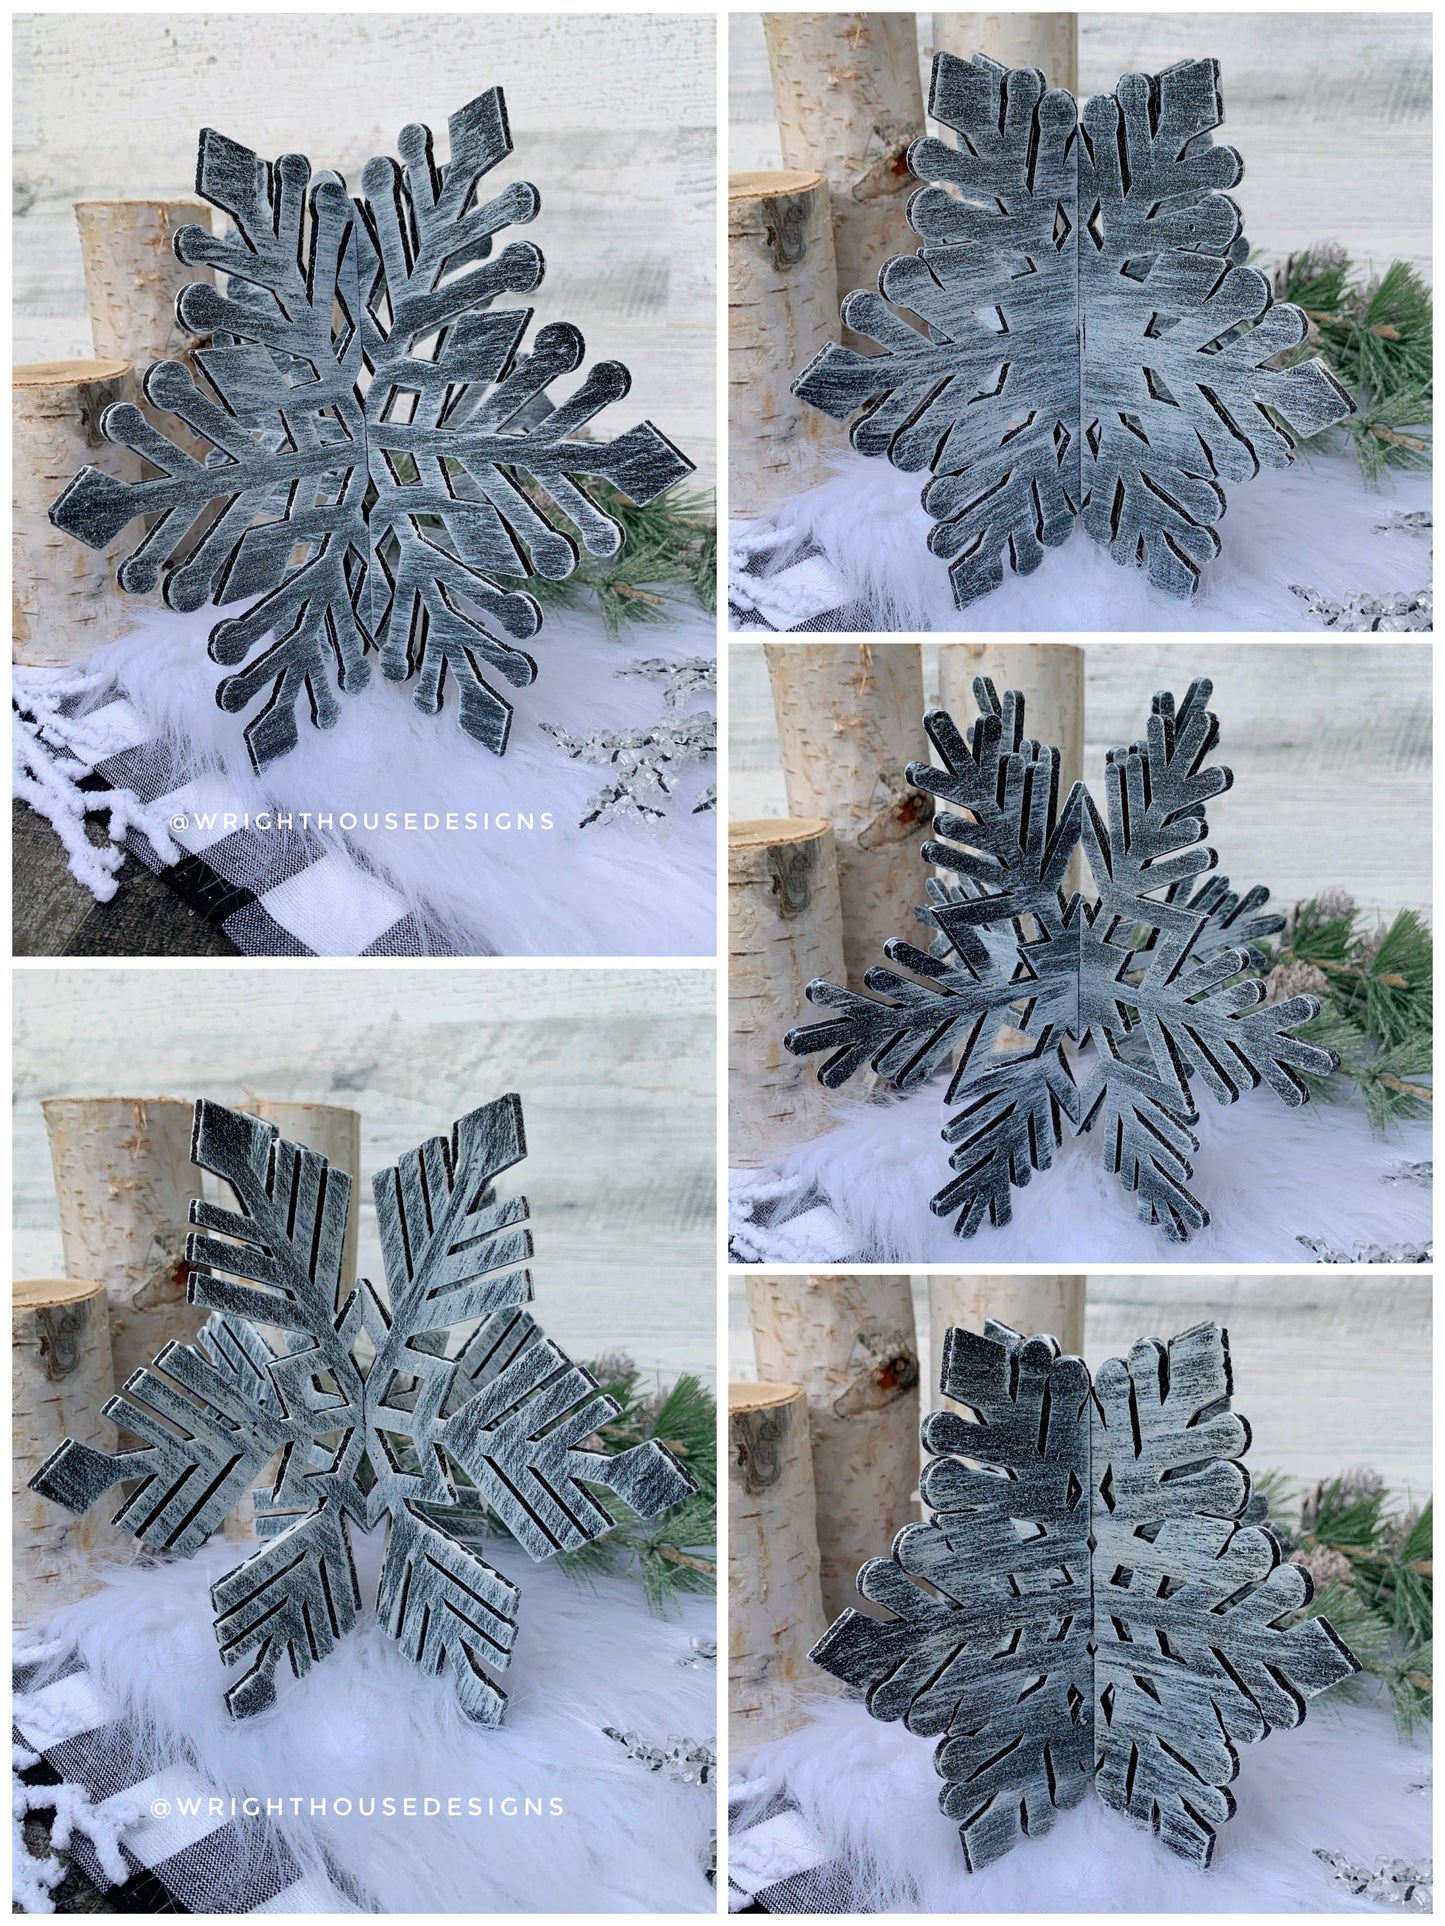 Winter 3D Interlocking Christmas Snowflakes - Large Set - Rustic Farmhouse - Laser Cut Wooden Holiday Decor - Fireplace Mantle Shelf Sitters